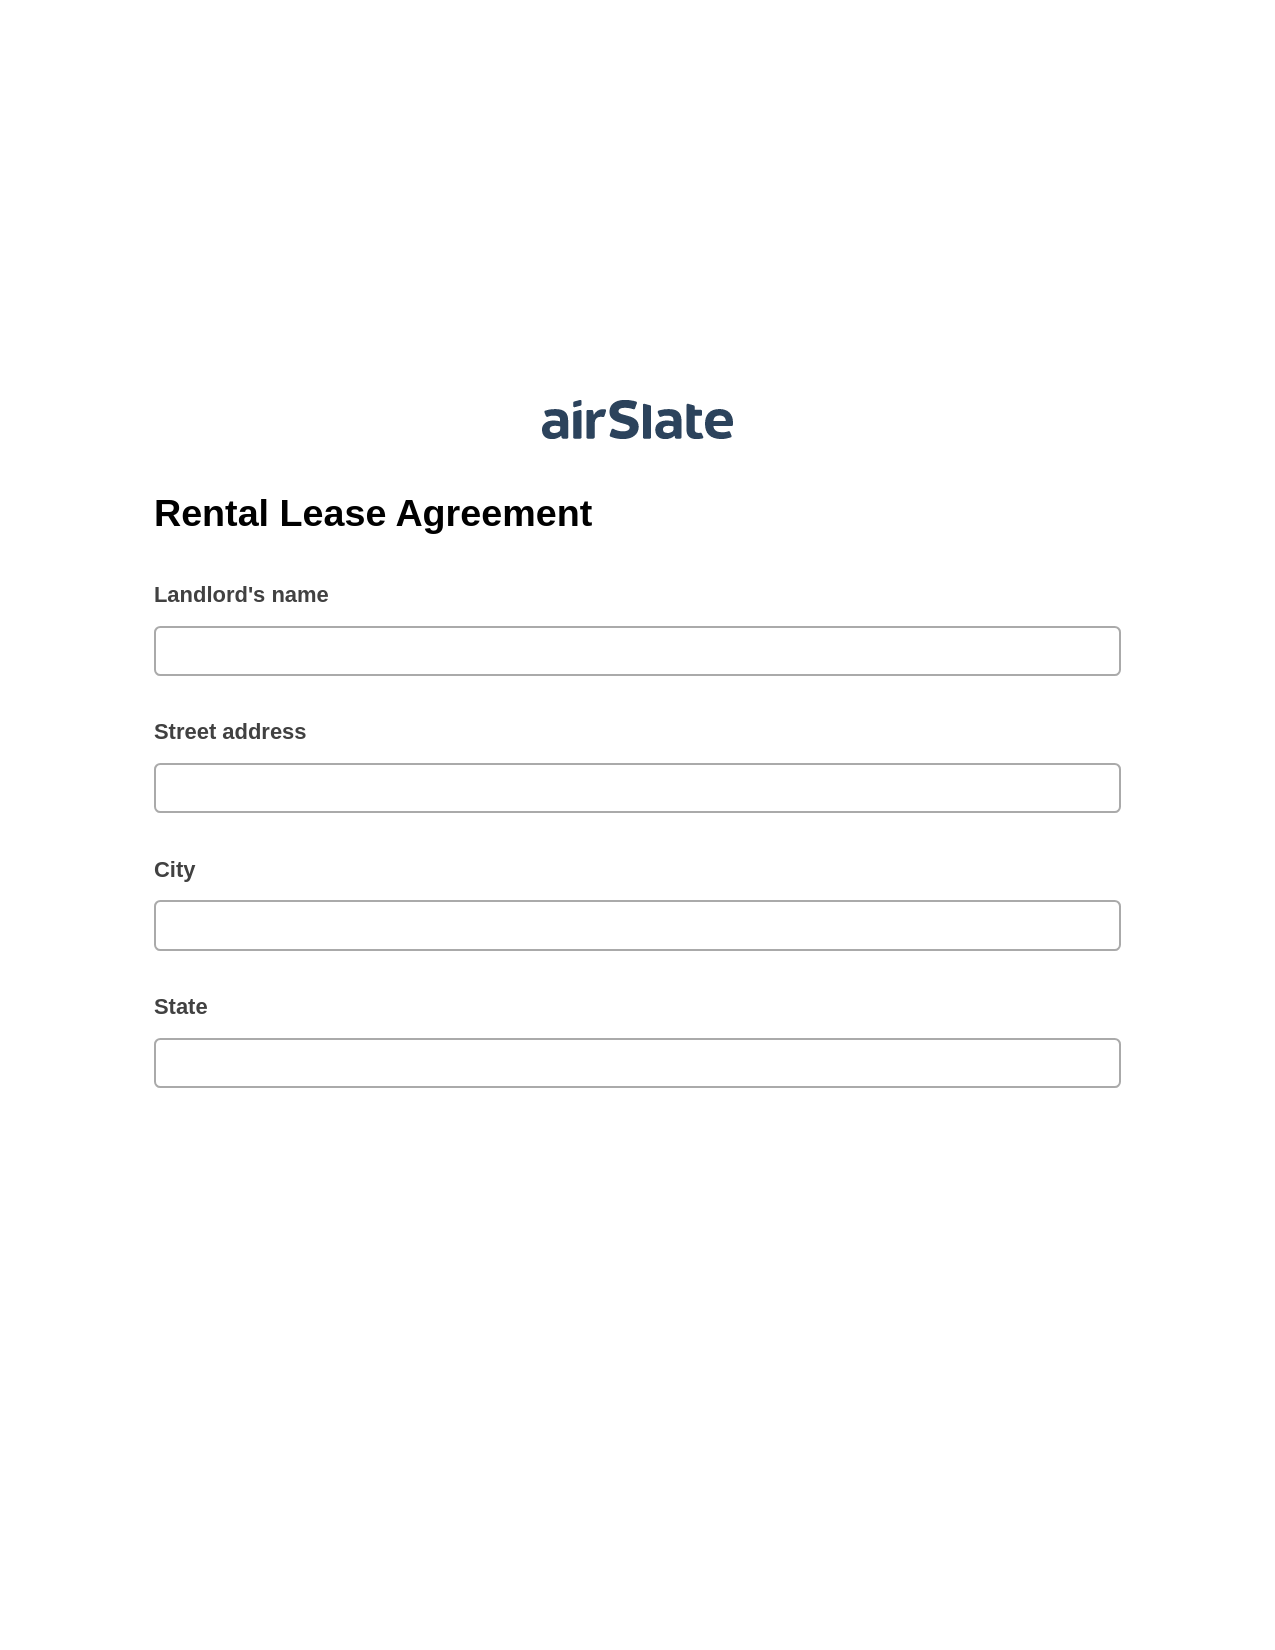 Rental Lease Agreement Pre-fill from Airtable Bot, Invoke Salesforce Process Bot, Export to Smartsheet